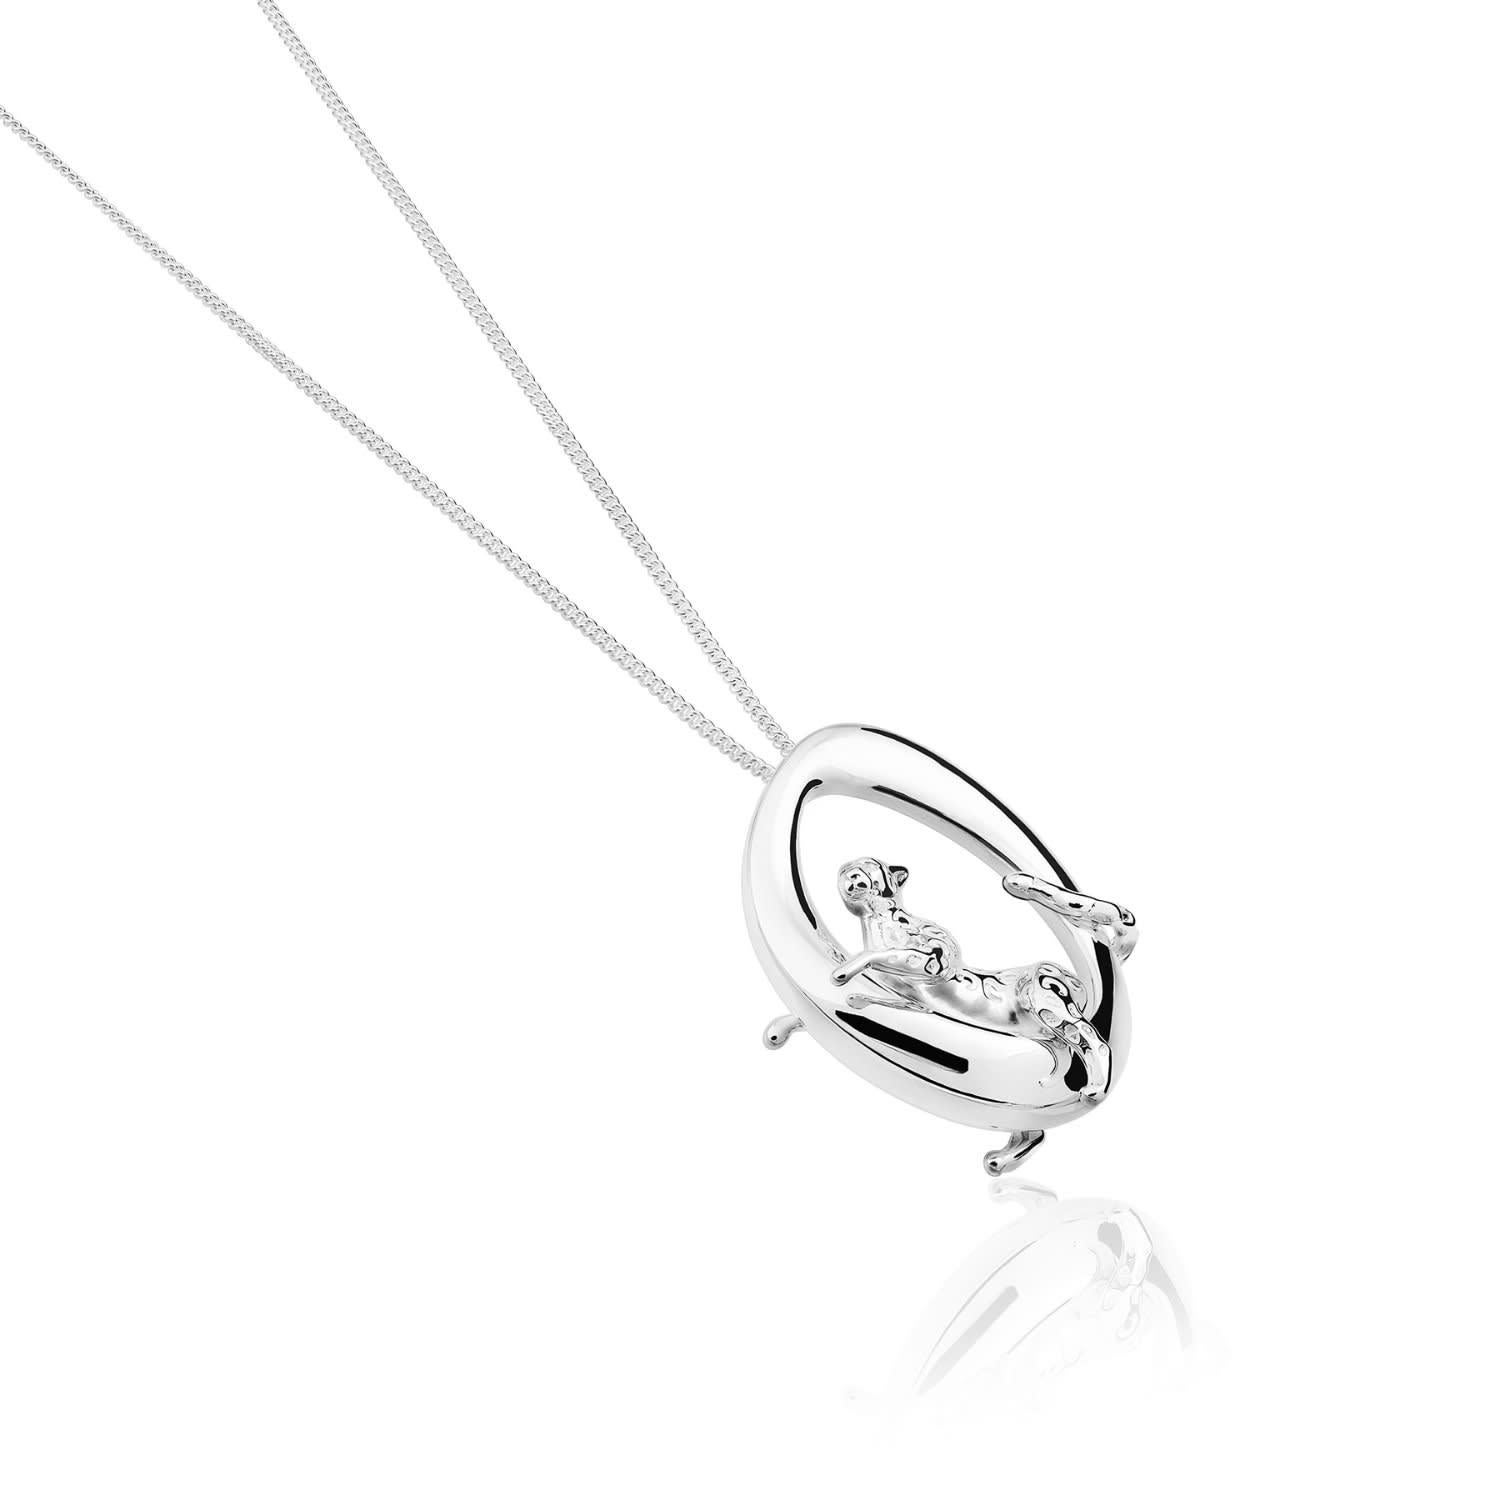 The Jaguar Small Pendant from the Animal´s Collection by TANE is made in silver .925. Suspended from a 2.36¨ long chain is an irregular link designed for the collection, inspired by nature.

TANE, the Mexican luxury brand founded in 1942, once again